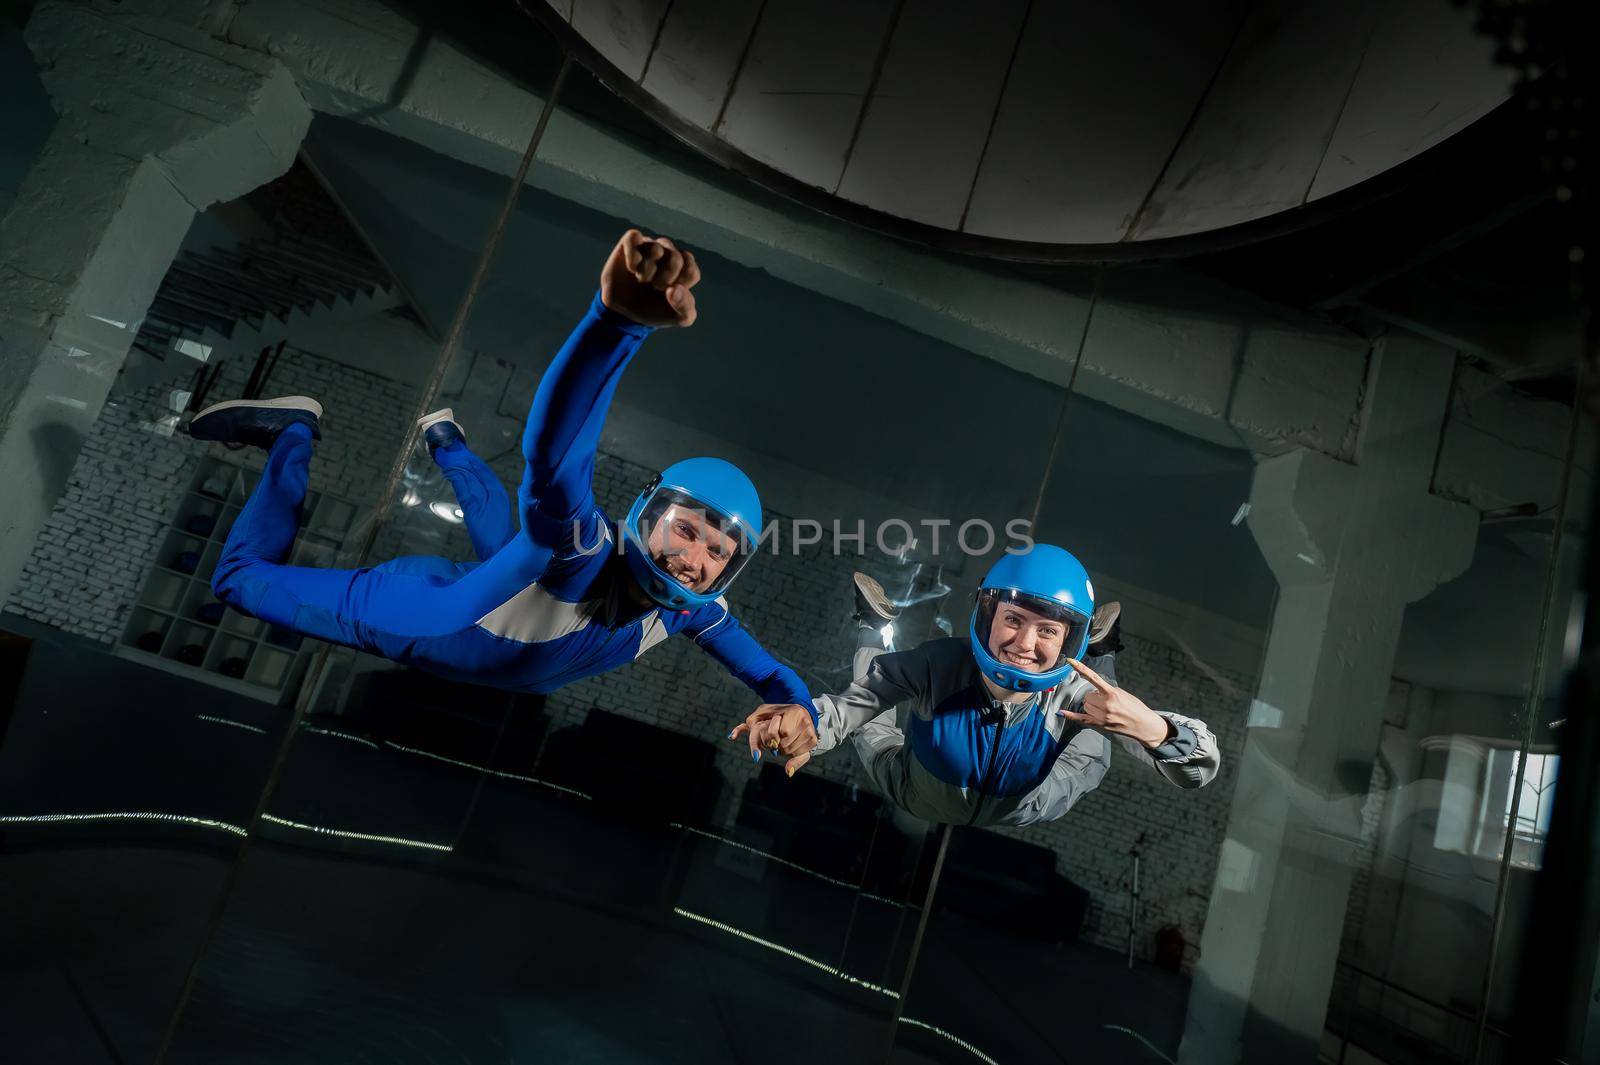 A man and a woman enjoy flying together in a wind tunnel. Free fall simulator by mrwed54